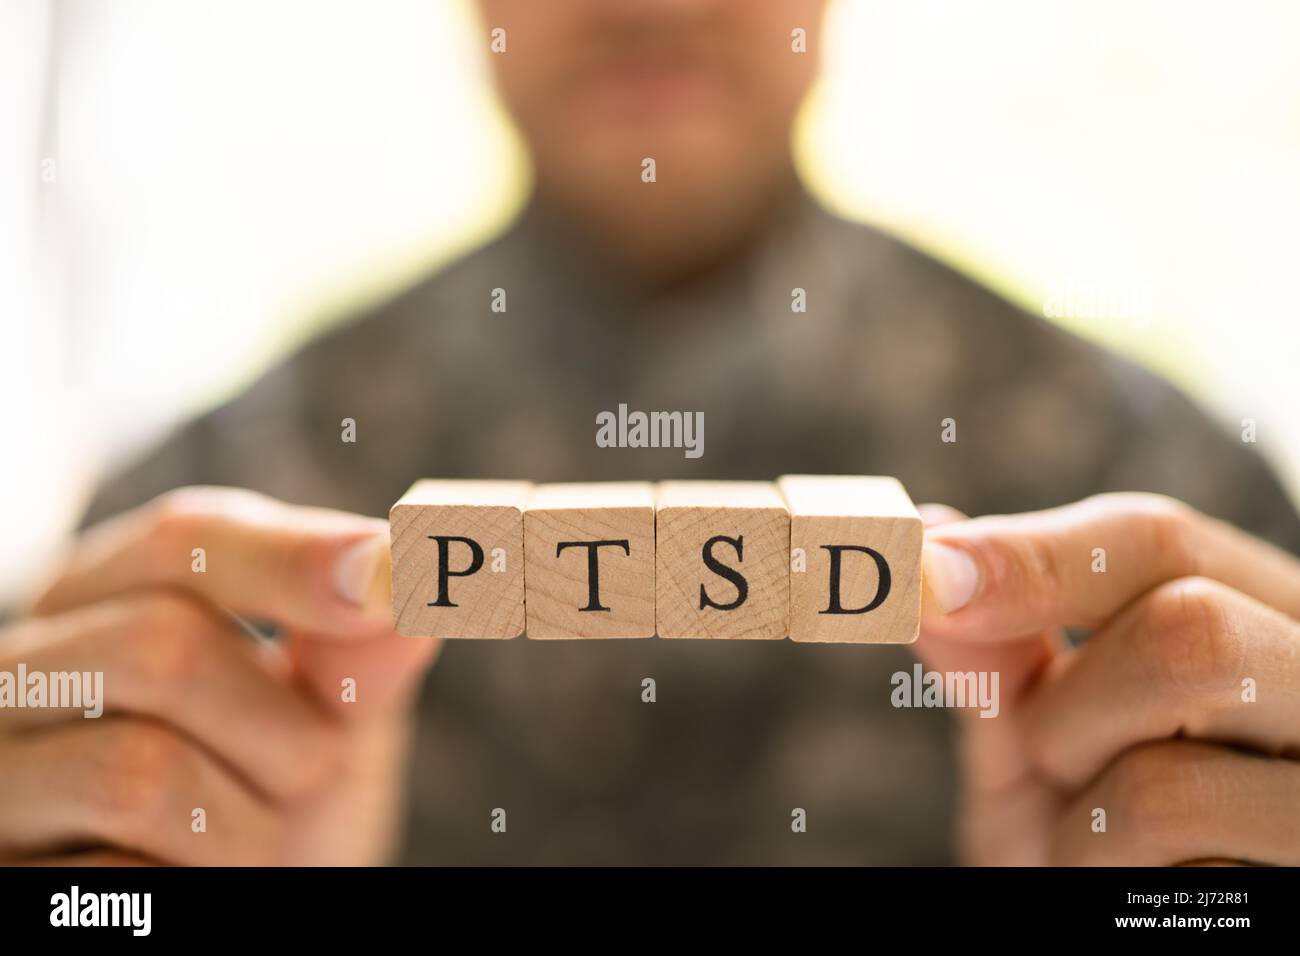 Army Military Soldier With PTSD Trauma Text Stock Photo